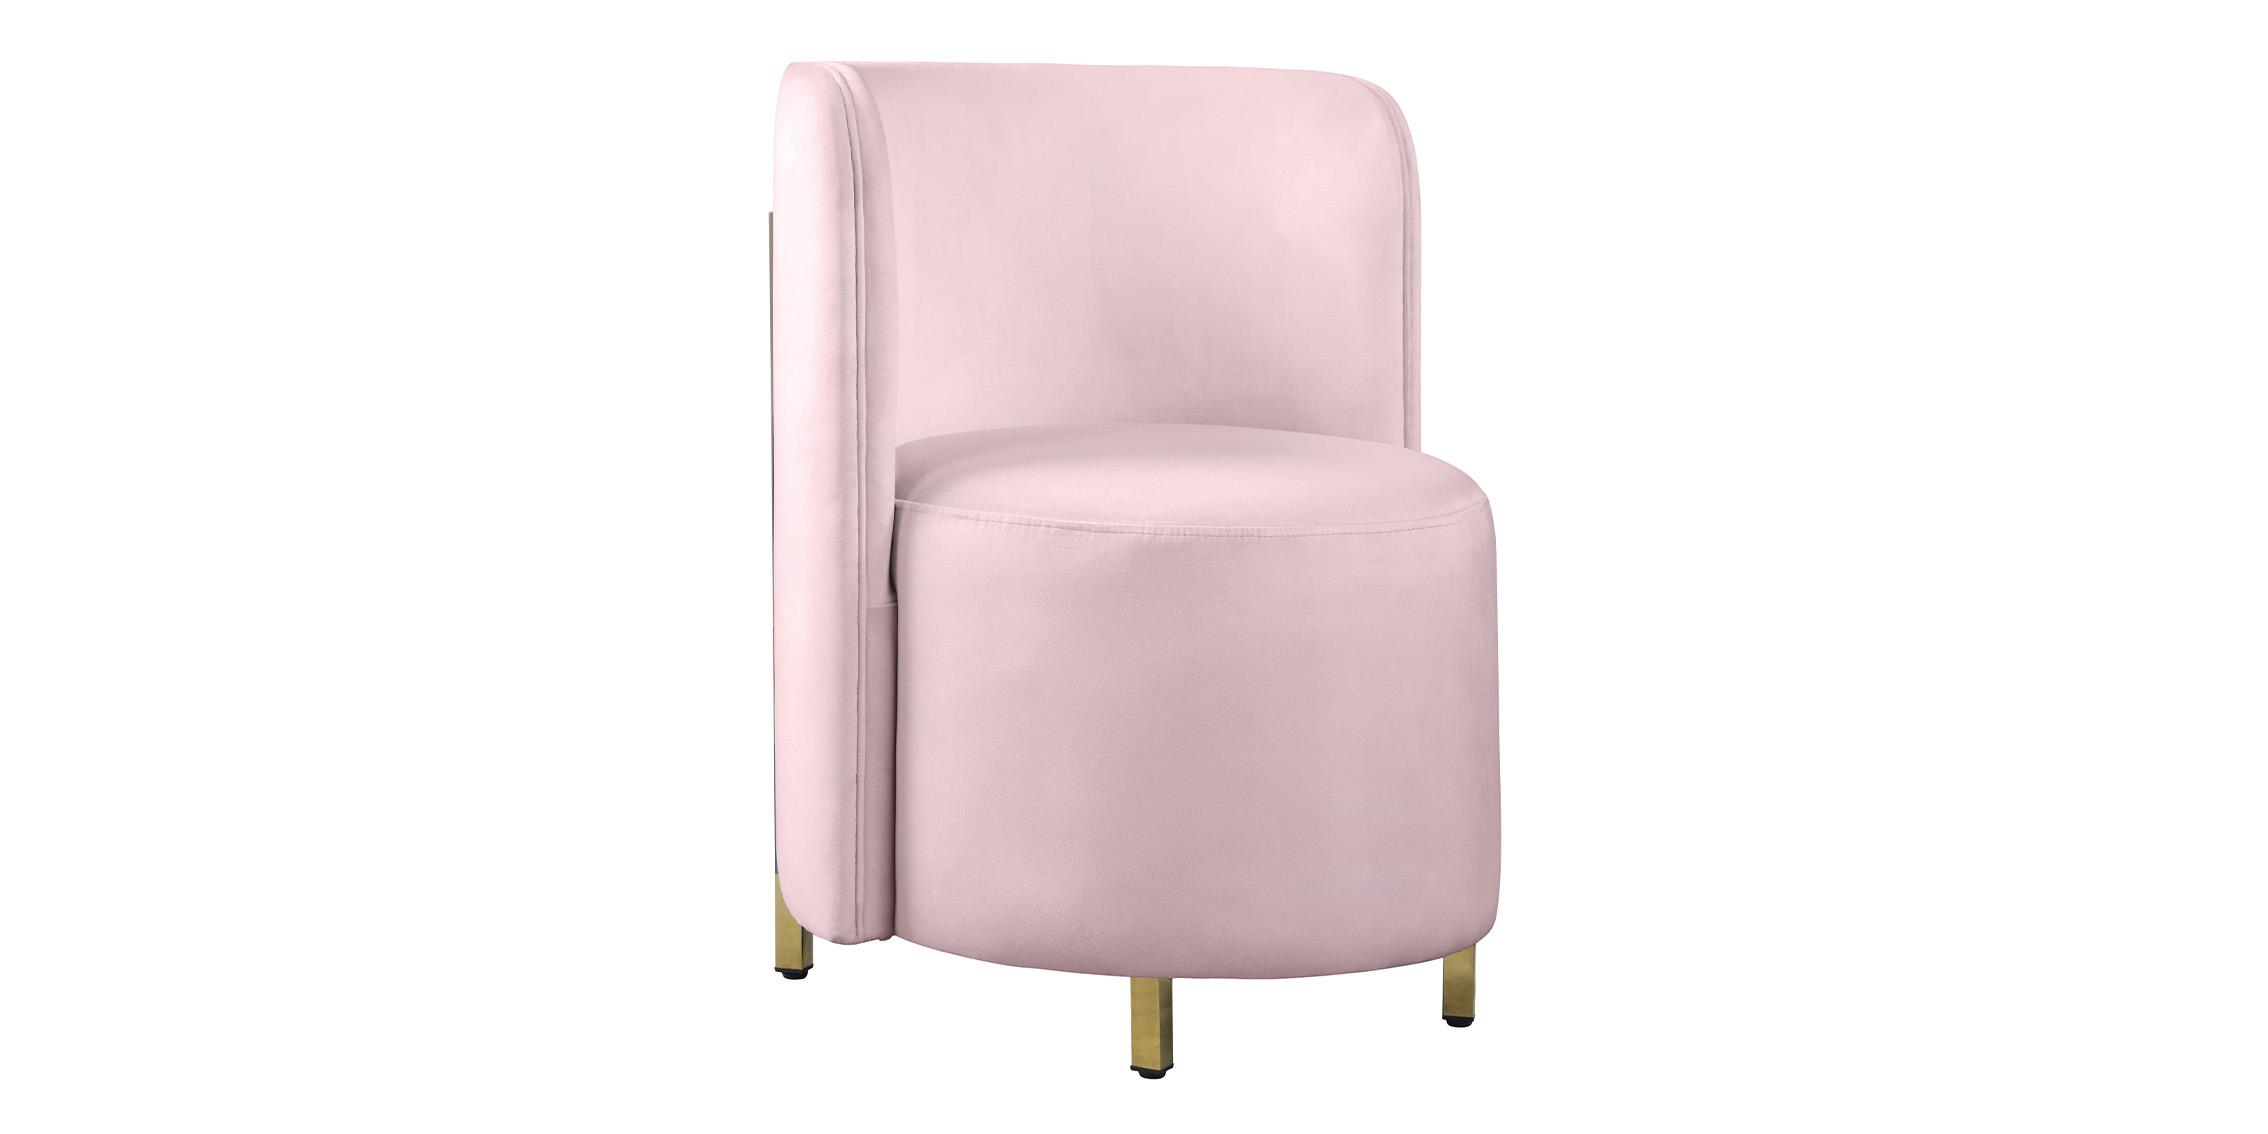 Contemporary, Modern Accent Chair ROTUNDA 518Pink-C 518Pink-C in Pink Velvet